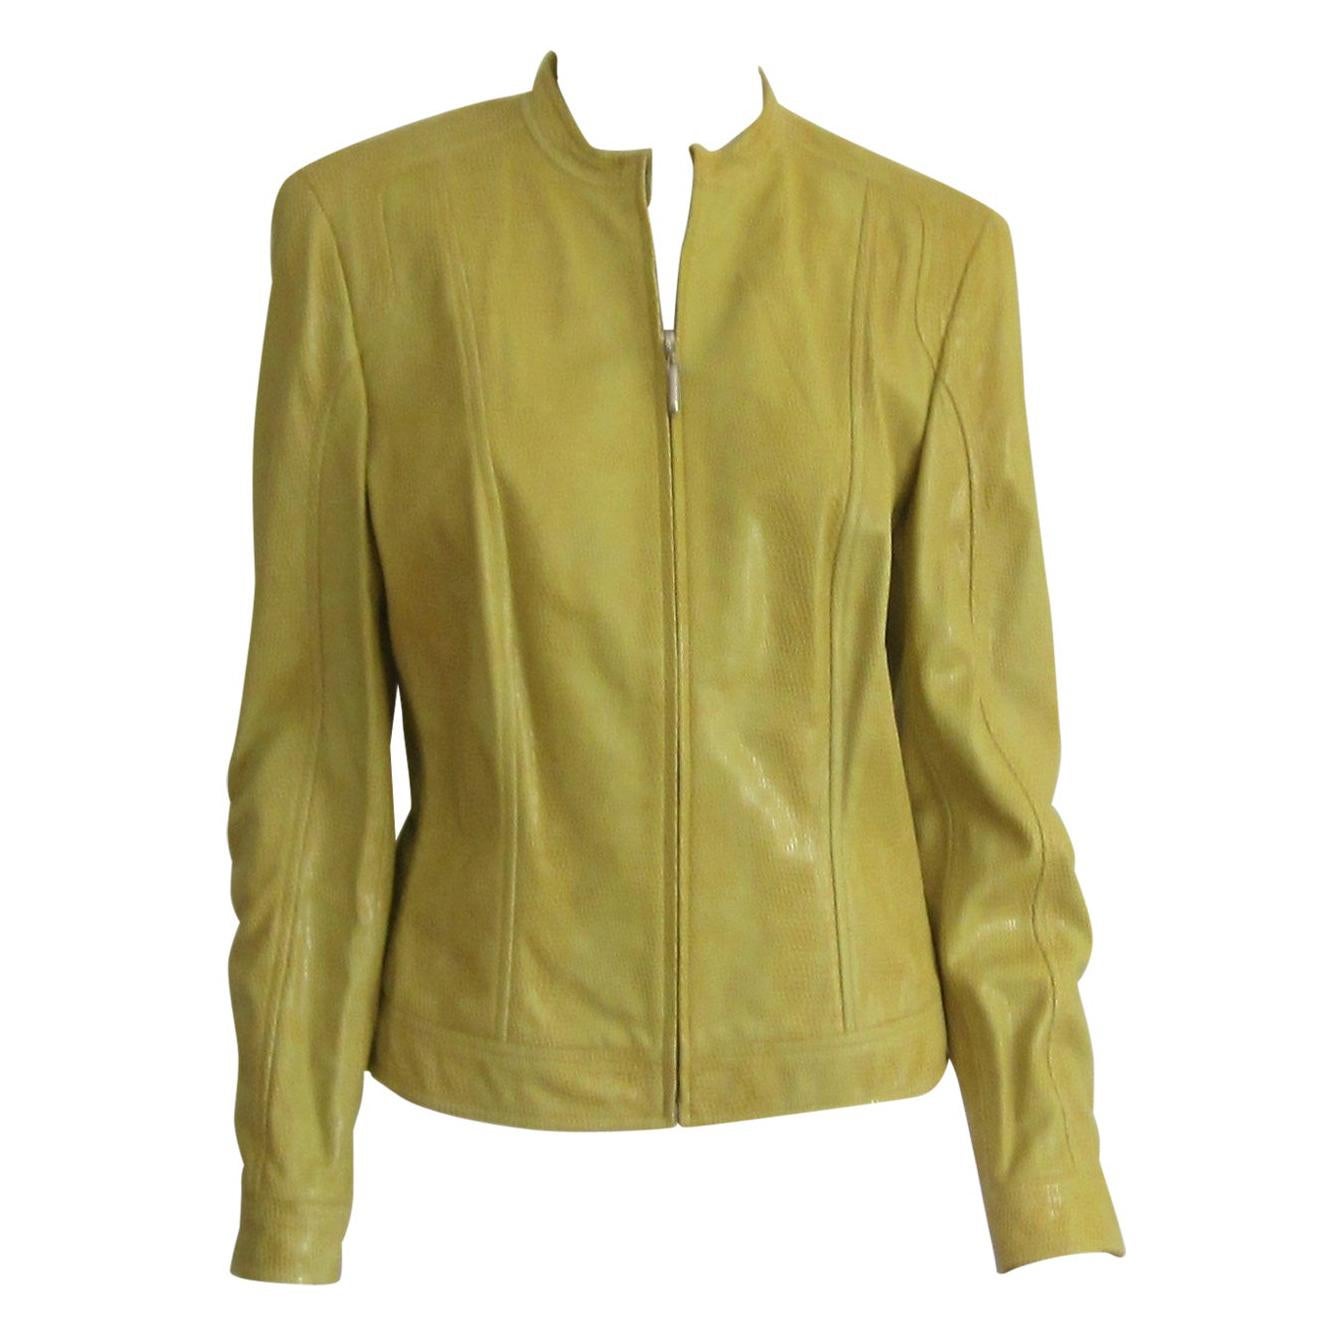  Escada Yellow Leather Fitted Jacket Reptile Embossed New With Tags 1990s 